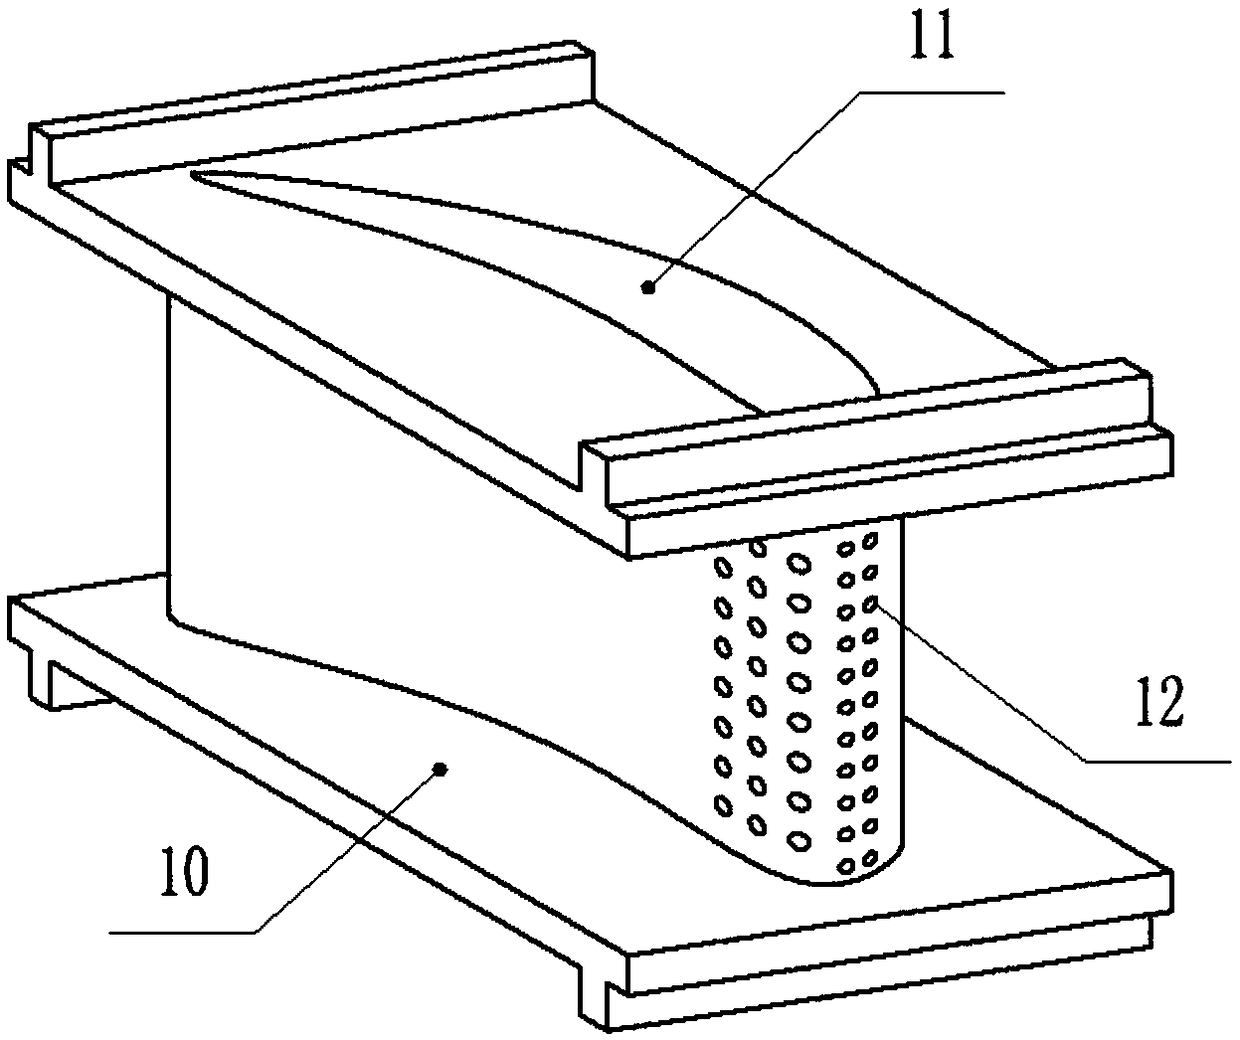 Five-shaft image measurement device used for measuring film hole shape and position parameters